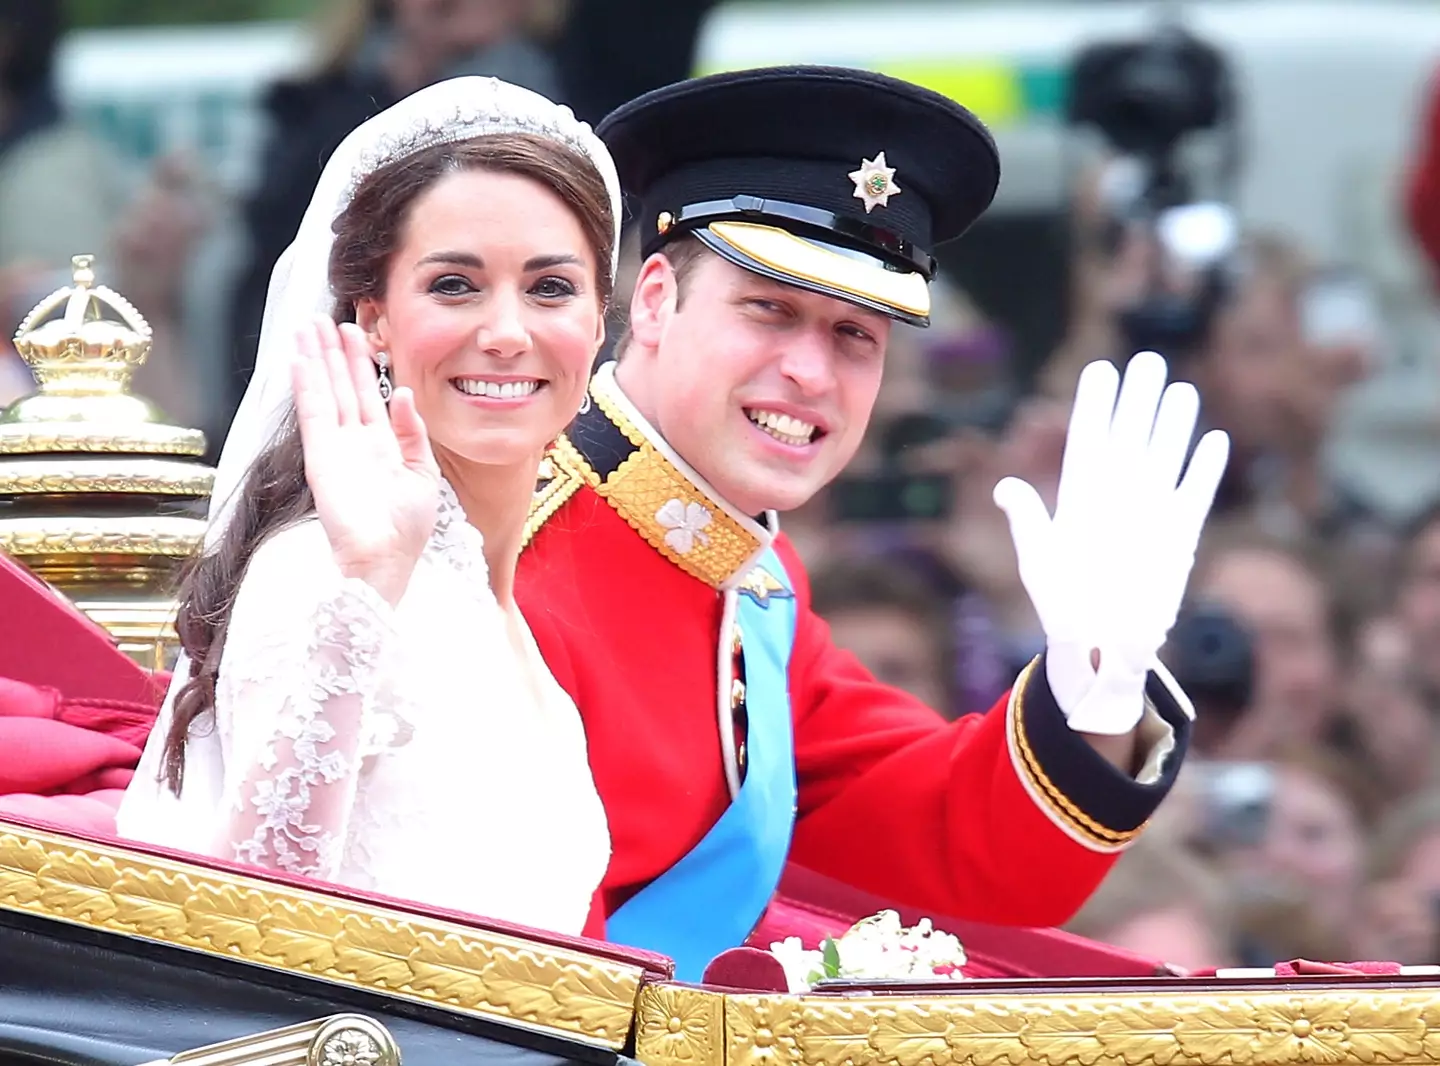 Prince William and Kate have been named Prince and Princess of Wales.